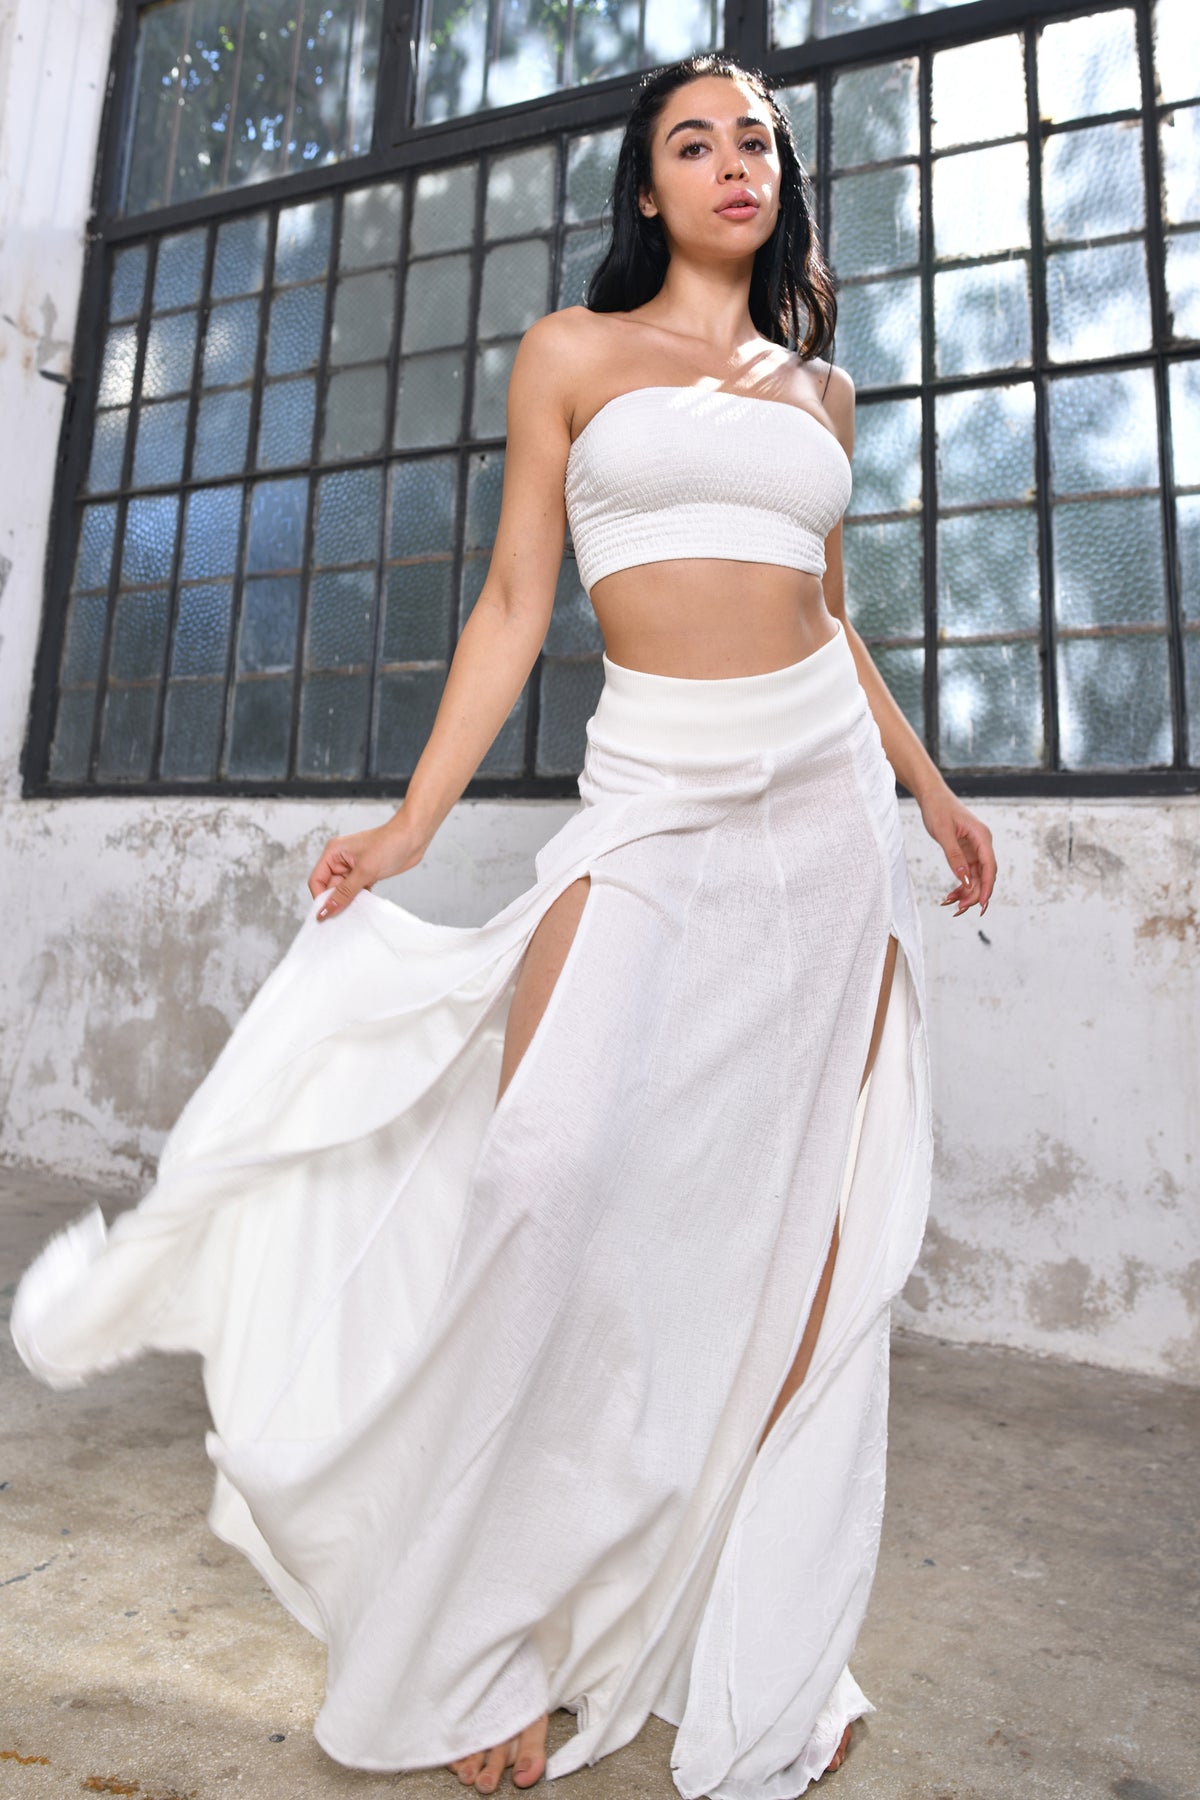 white sexy and dramatic split design, high-quality rayon fabric, comfortable elastic waistband, range of colors, one size fits most, effortlessly chic bohemian style, summer festivals, beach parties, versatile dress up or down style, boho goddess skirt, grecian goddess skirt, bohemian style